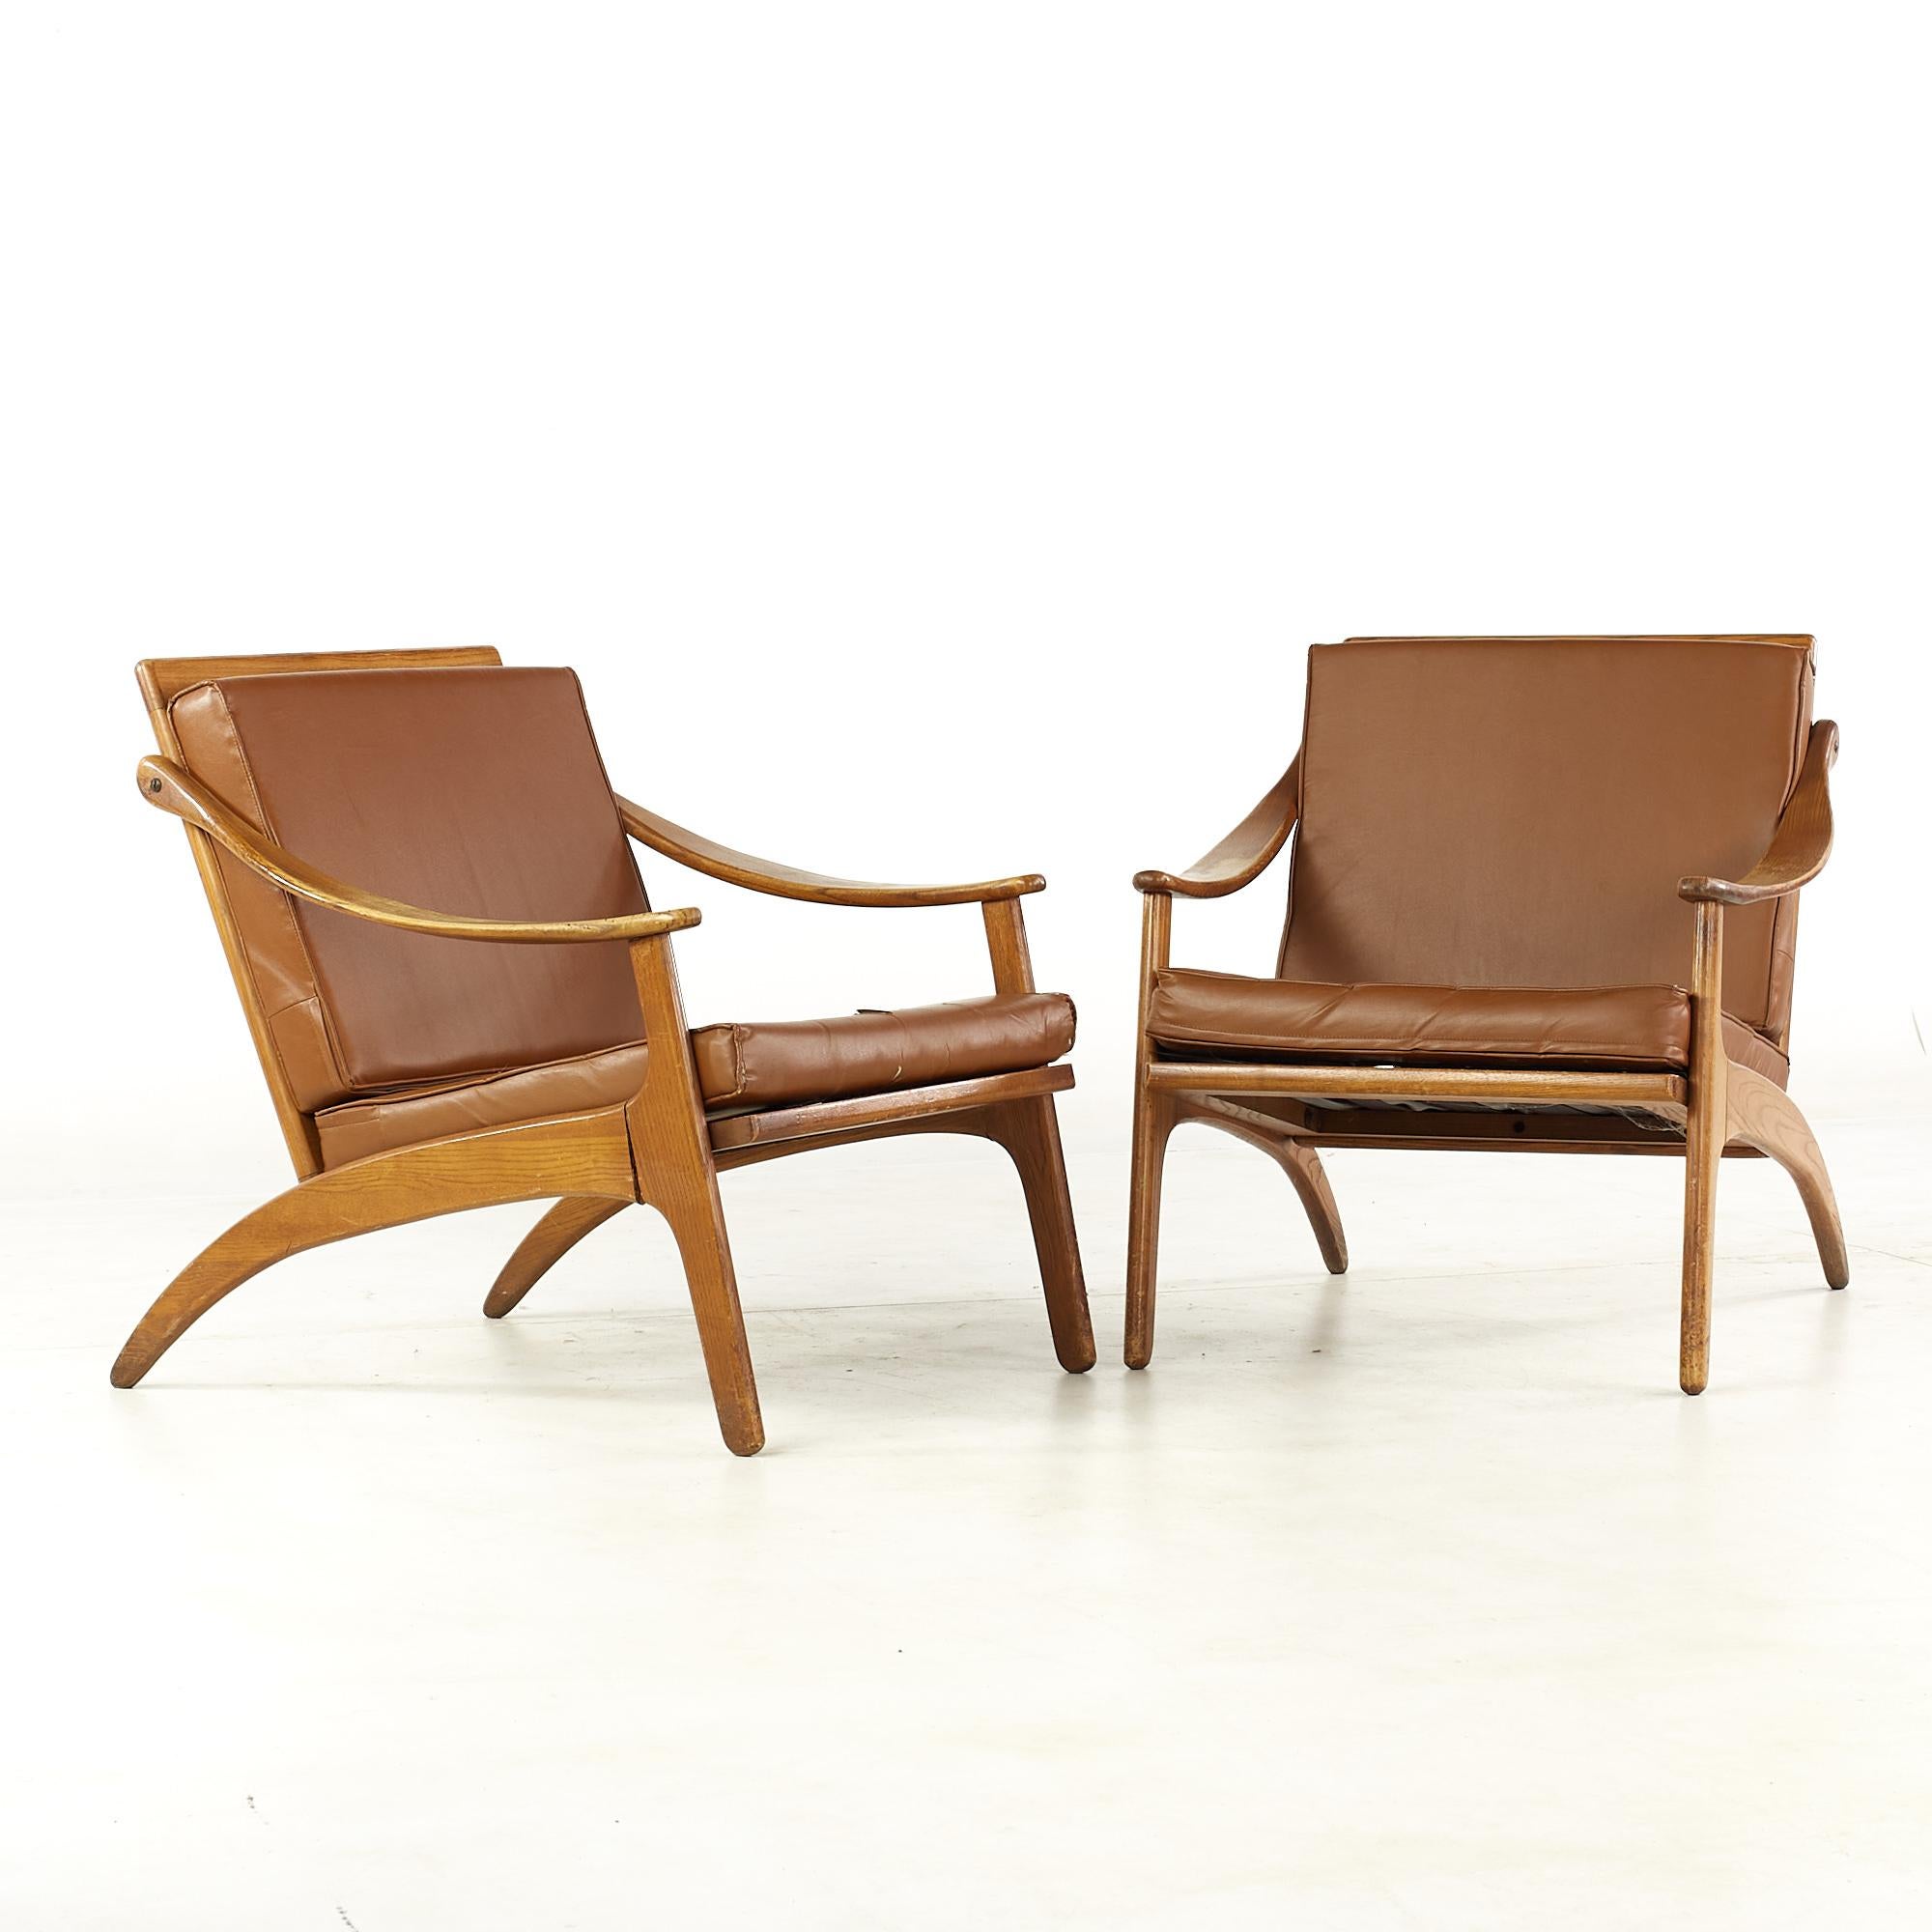 Arne Hovmand Olsen for P Mikkelsen mid-century teak lean back lounge chairs - pair.

Each chair measures: 26 wide x 31 deep x 28 high, with a seat height of 15.5 and arm height/chair clearance 19.25 inches.

All pieces of furniture can be had in